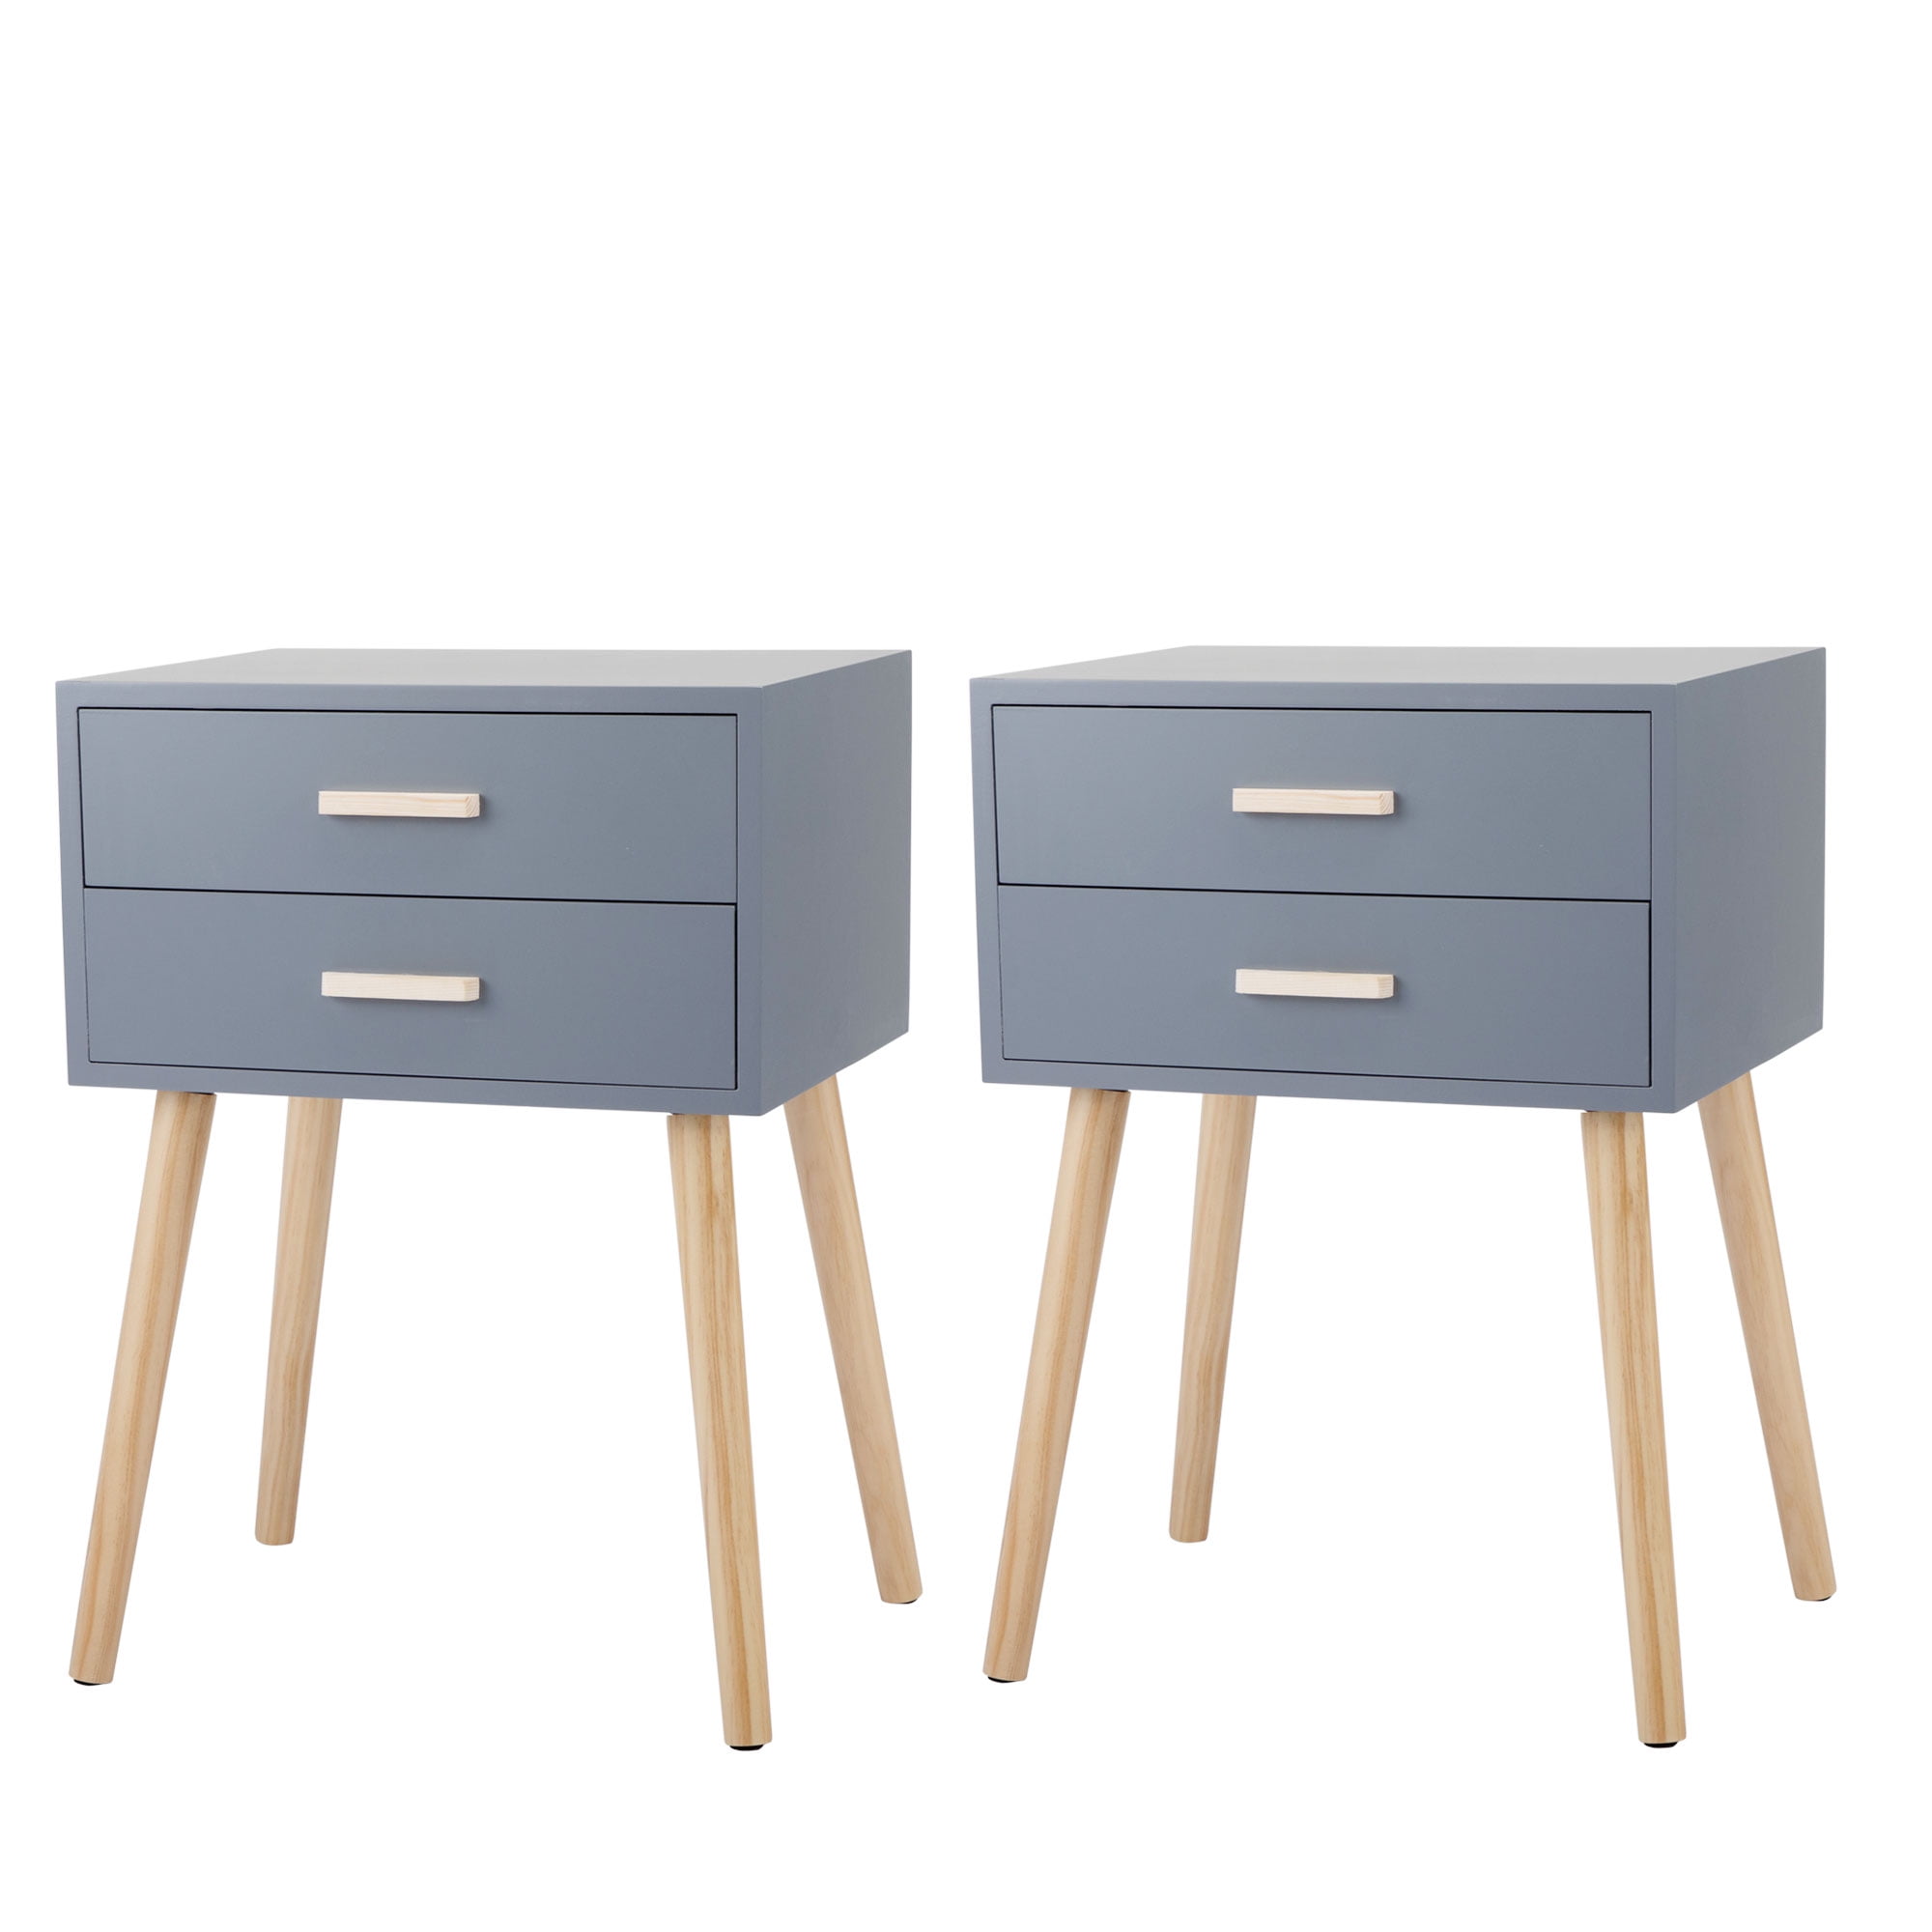 Nightstand End Table w/White Storage Drawer for Bedroom Living Room Office Home Furniture White JAXPETY Set of 2 Wooden Bedside Table Solid Wood Legs